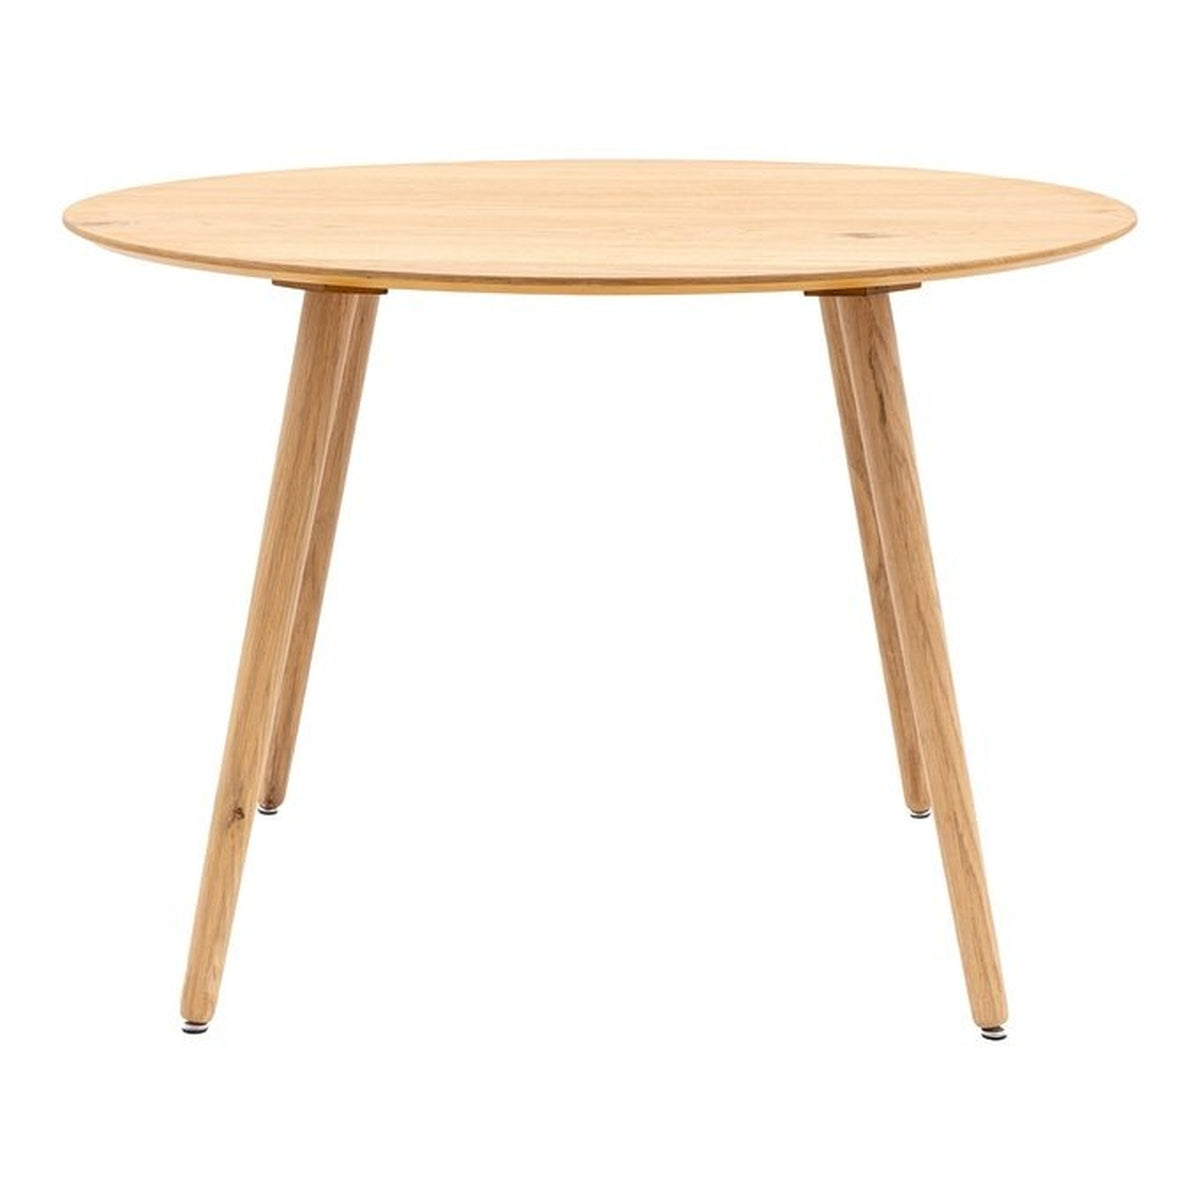 Gallery Interiors Alston Round Dining Table In Natural